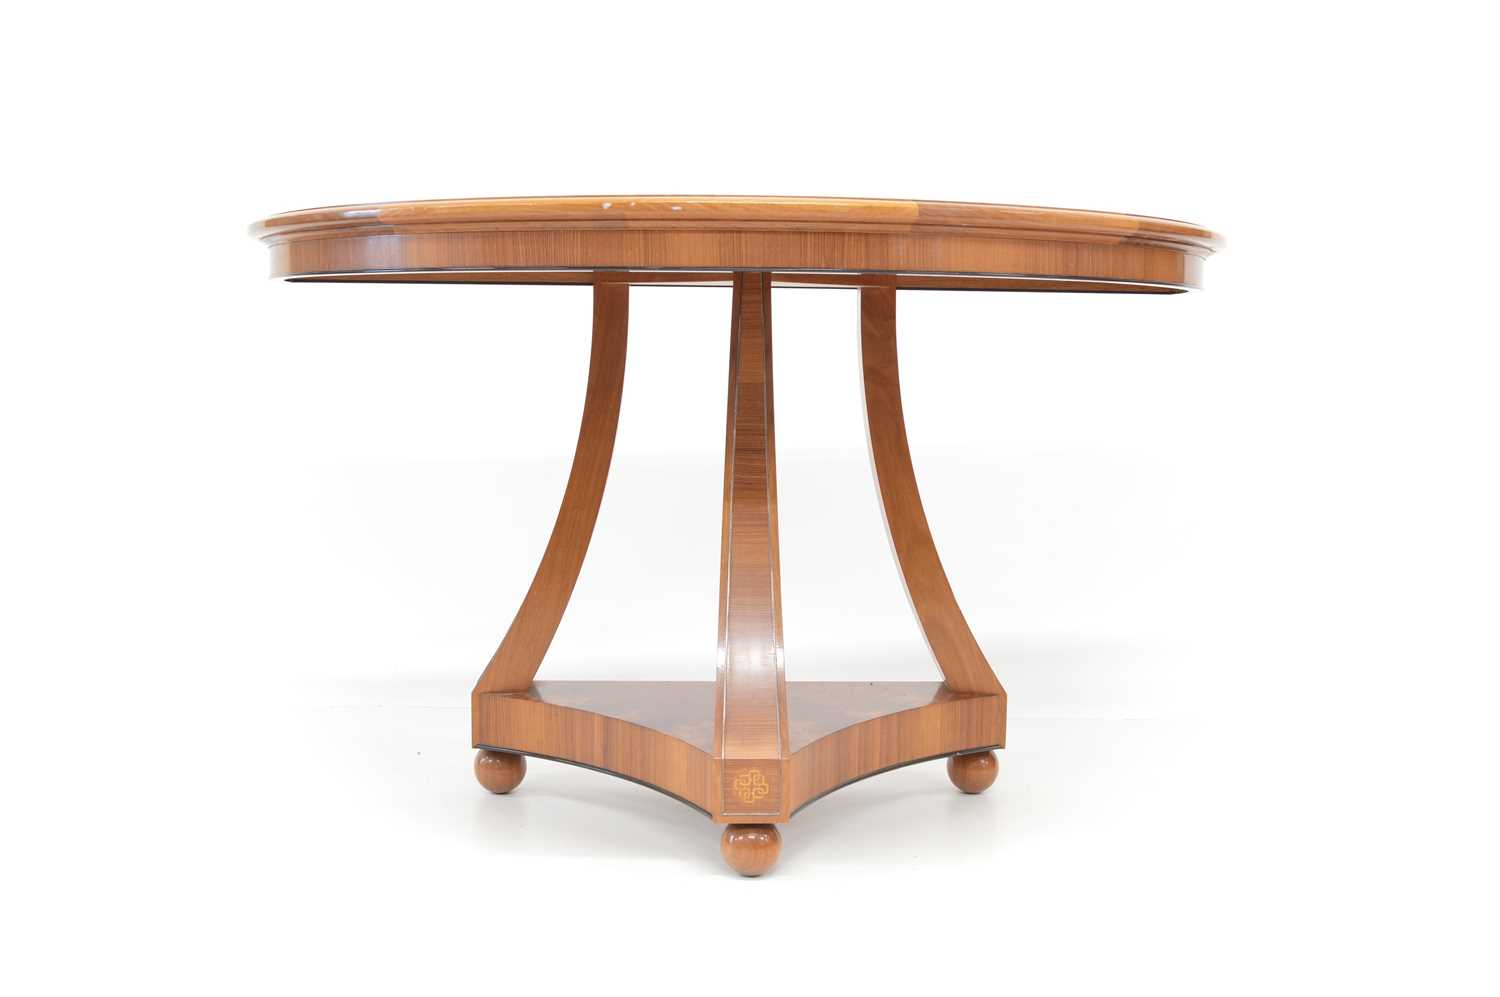 Pair of Mahogany side tables by Silver Linings workshop - Image 7 of 9